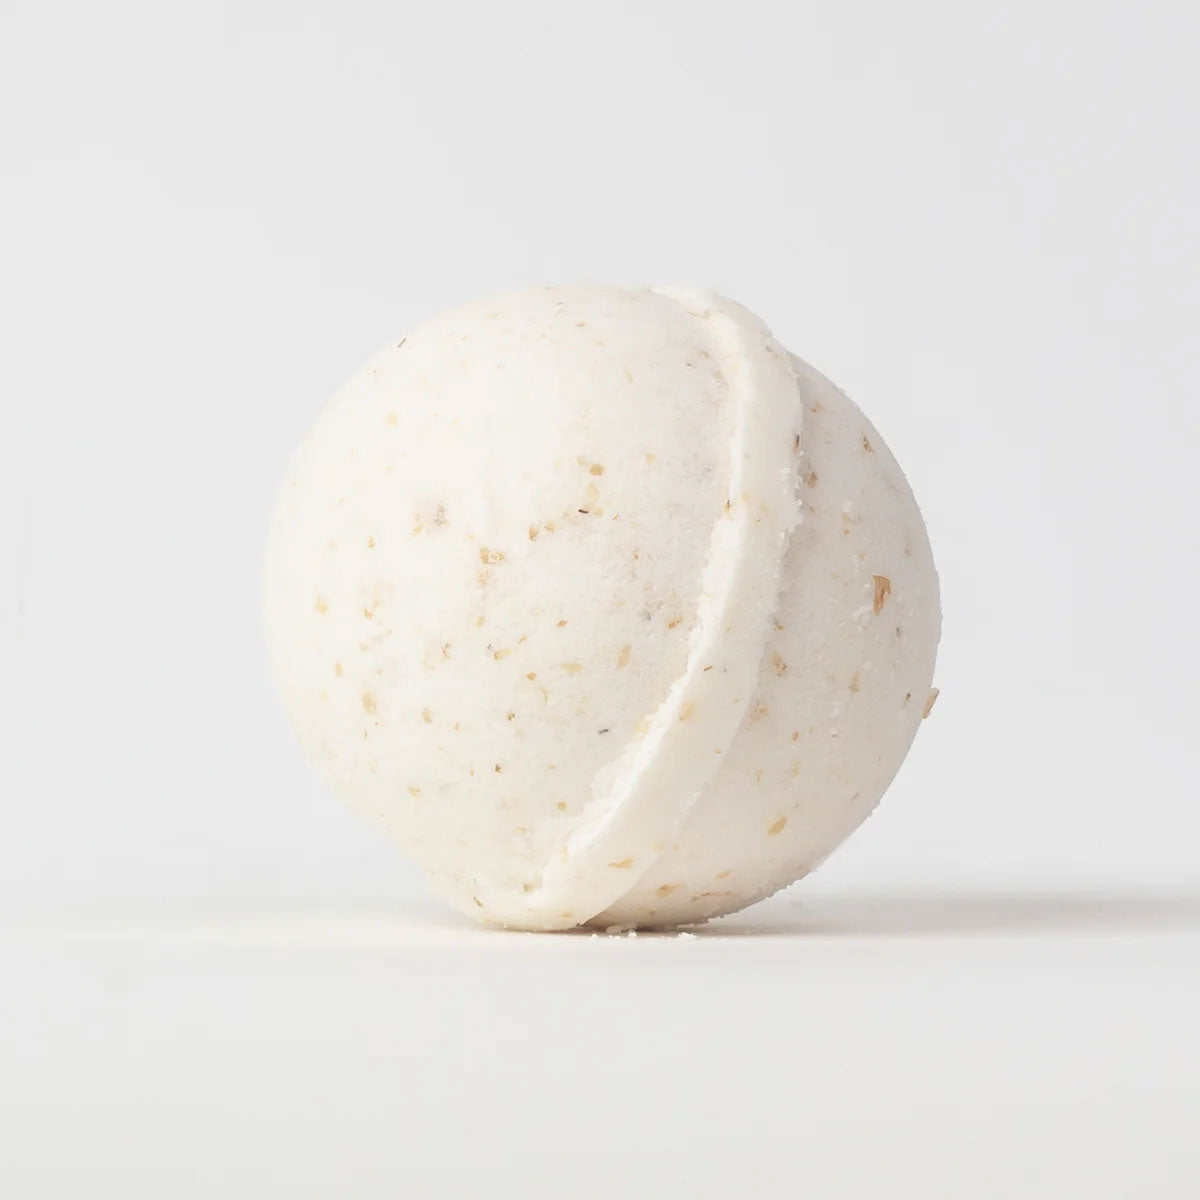 These all-natural bath bombs are a non-toxic and eco-friendly are the perfect addition to your bath!